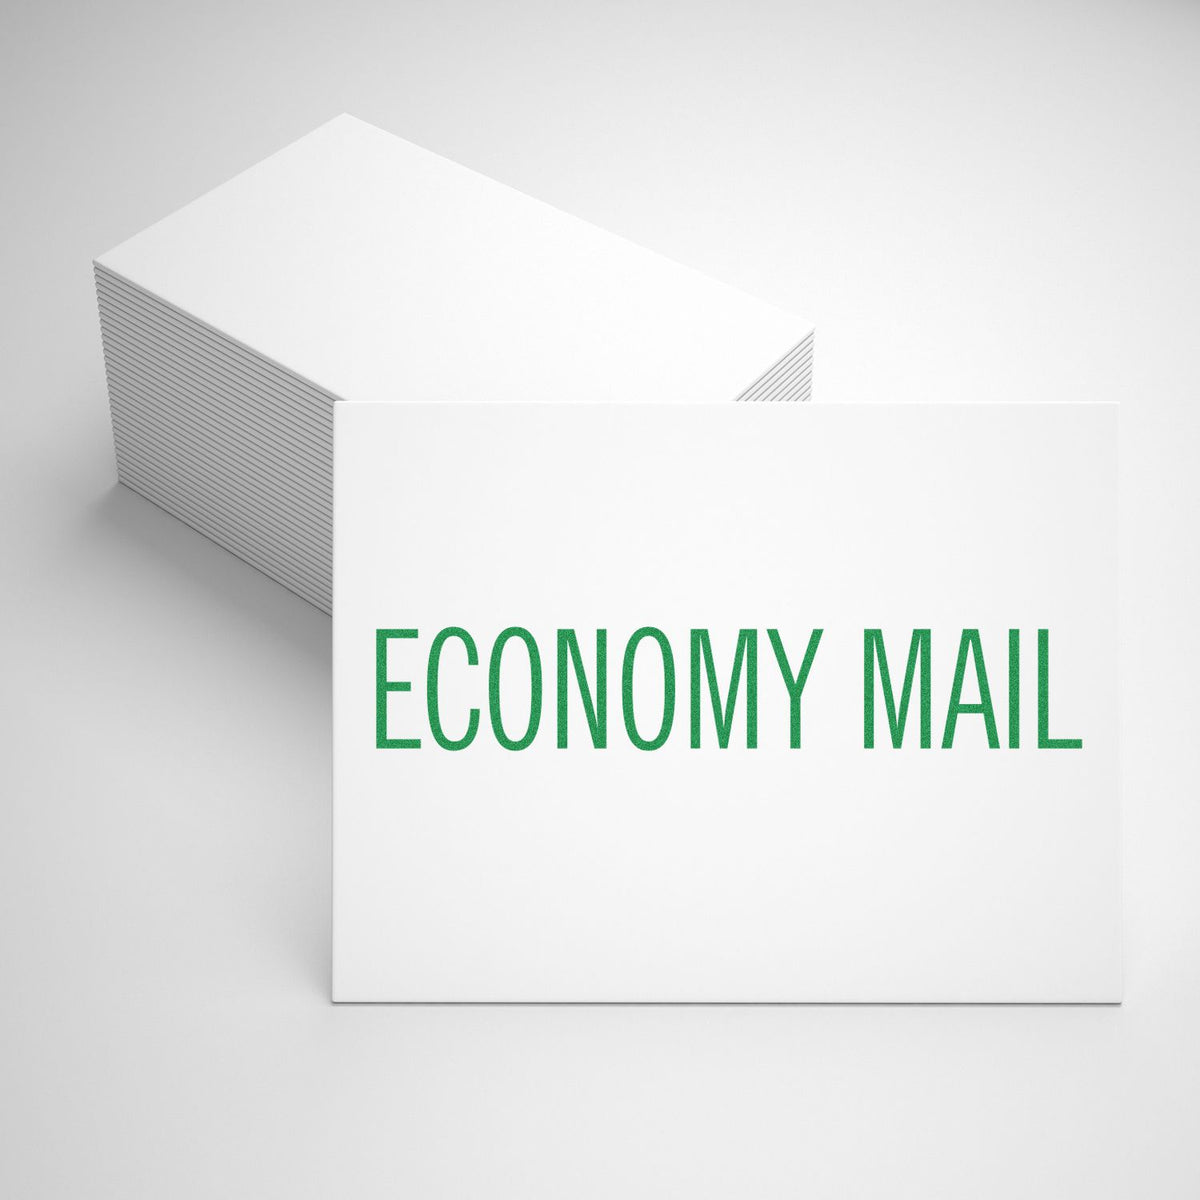 Economy Mail Rubber Stamp In Use